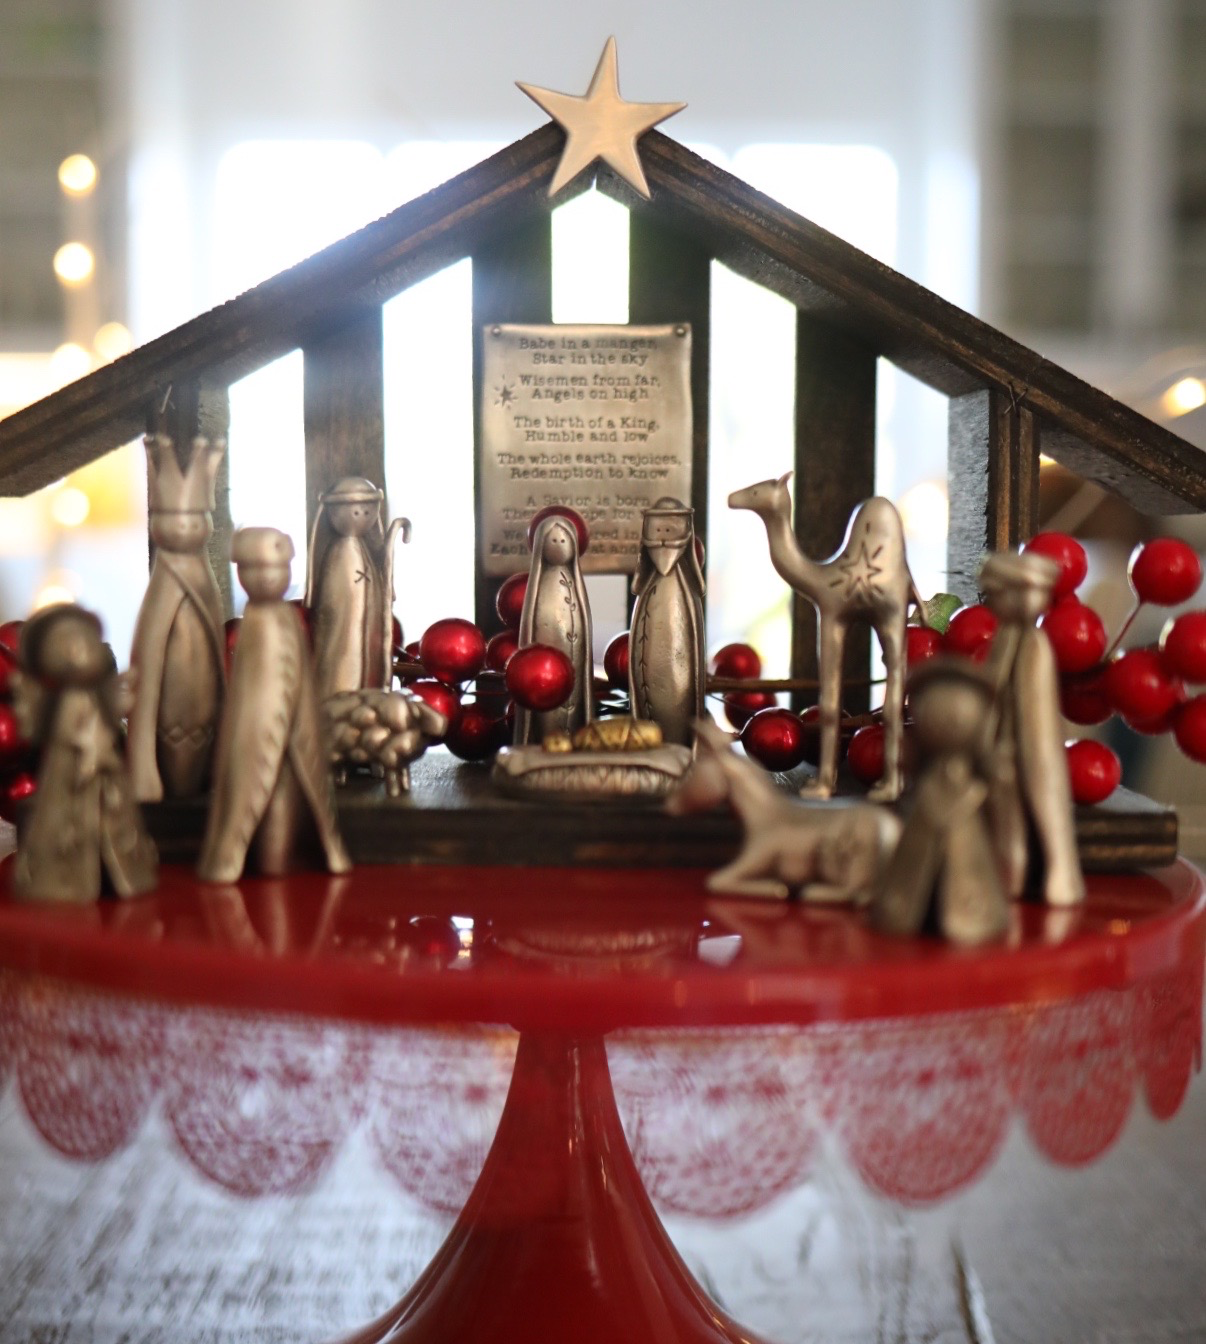 How to display your Christmas nativity scene